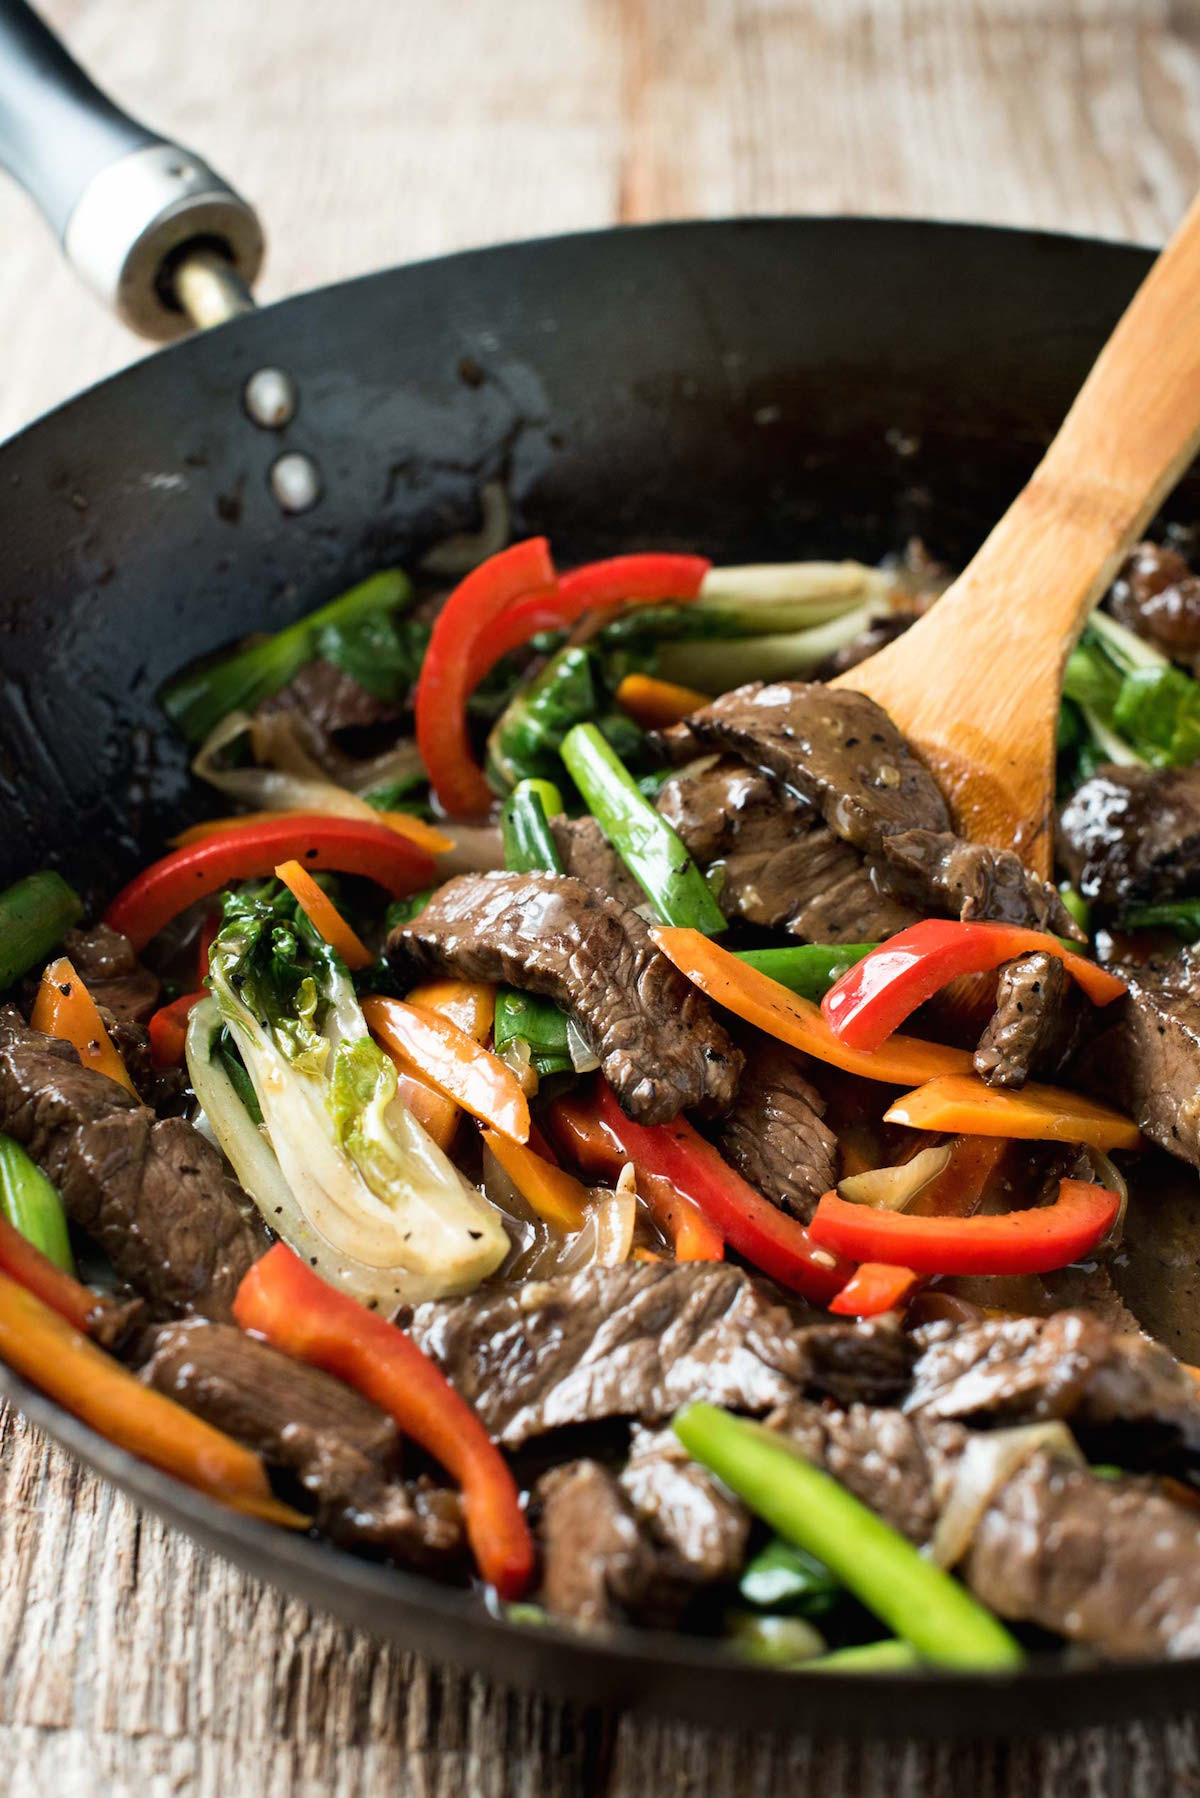 Asian Stir Fry Recipes
 25 Easy Stir Fry Dishes You Simply Must Try